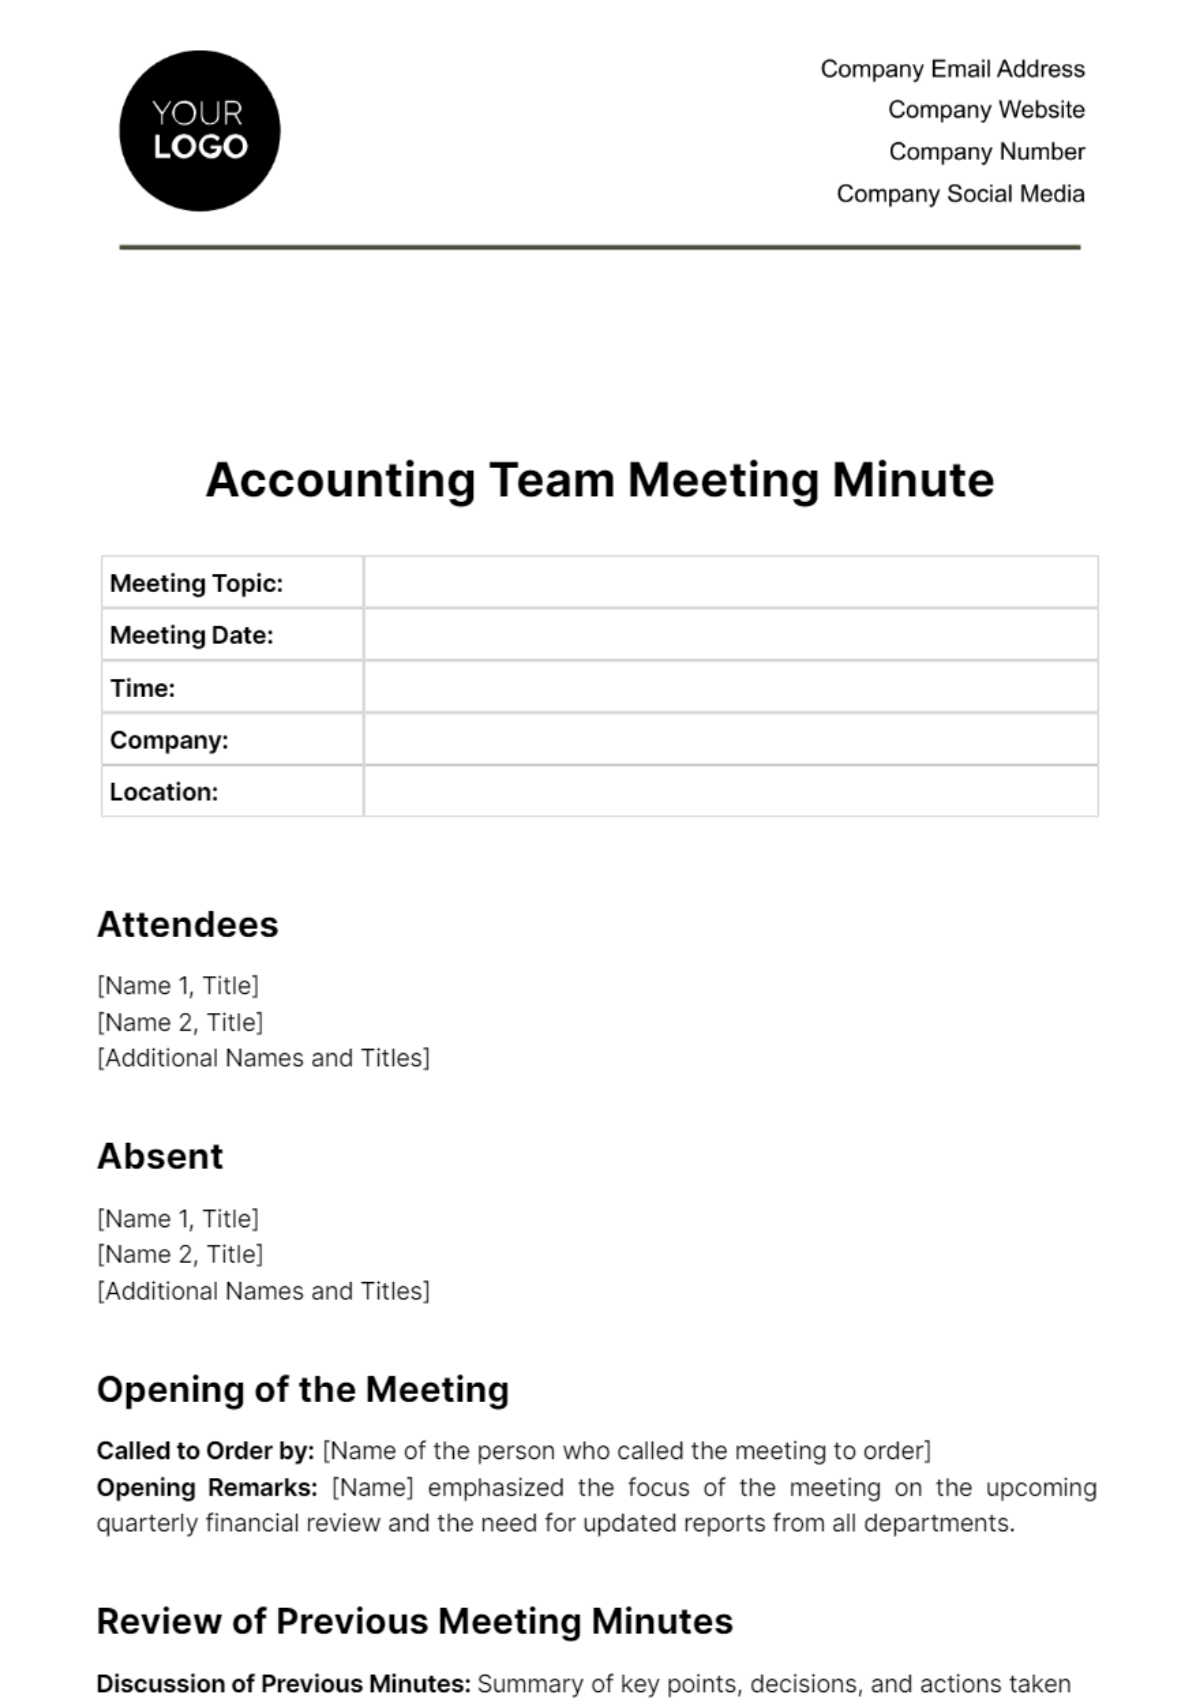 Free Accounting Team Meeting Minute Template